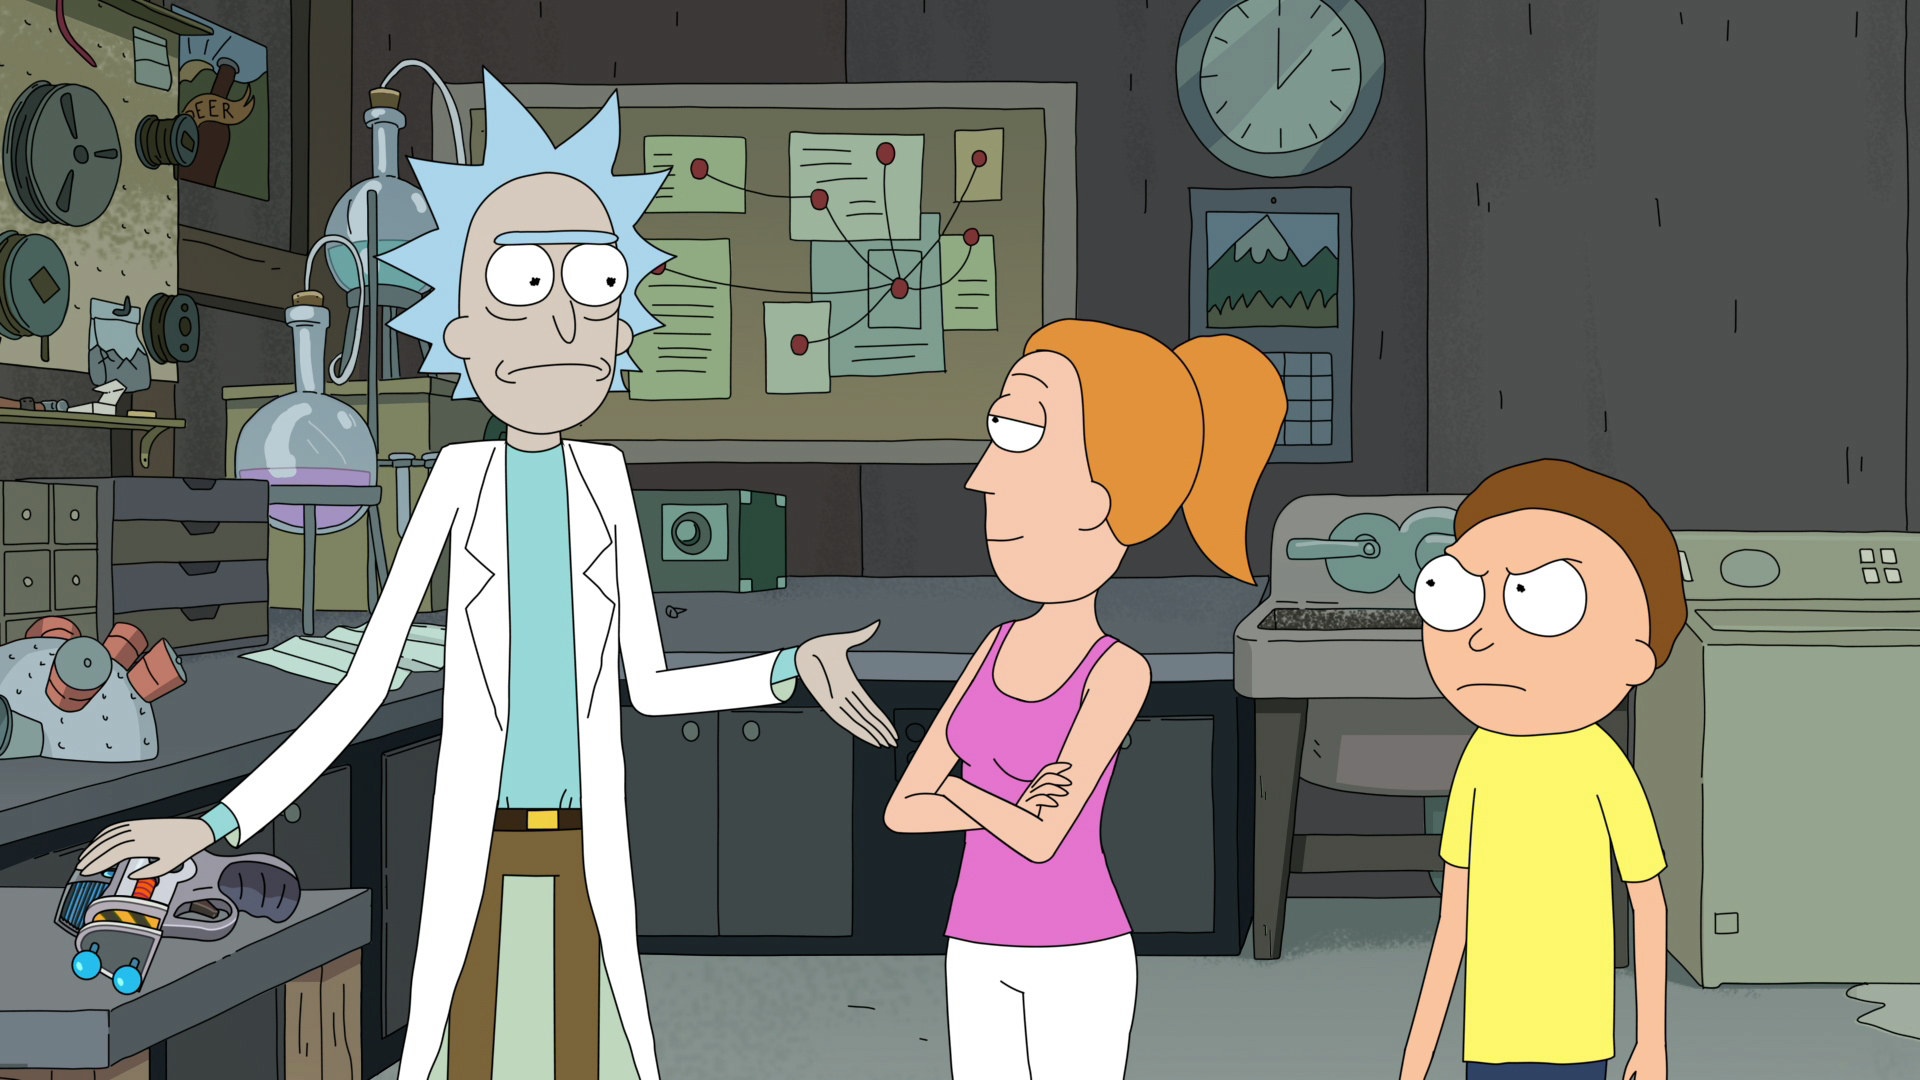 Rick, Summer and Morty from Rick and Morty